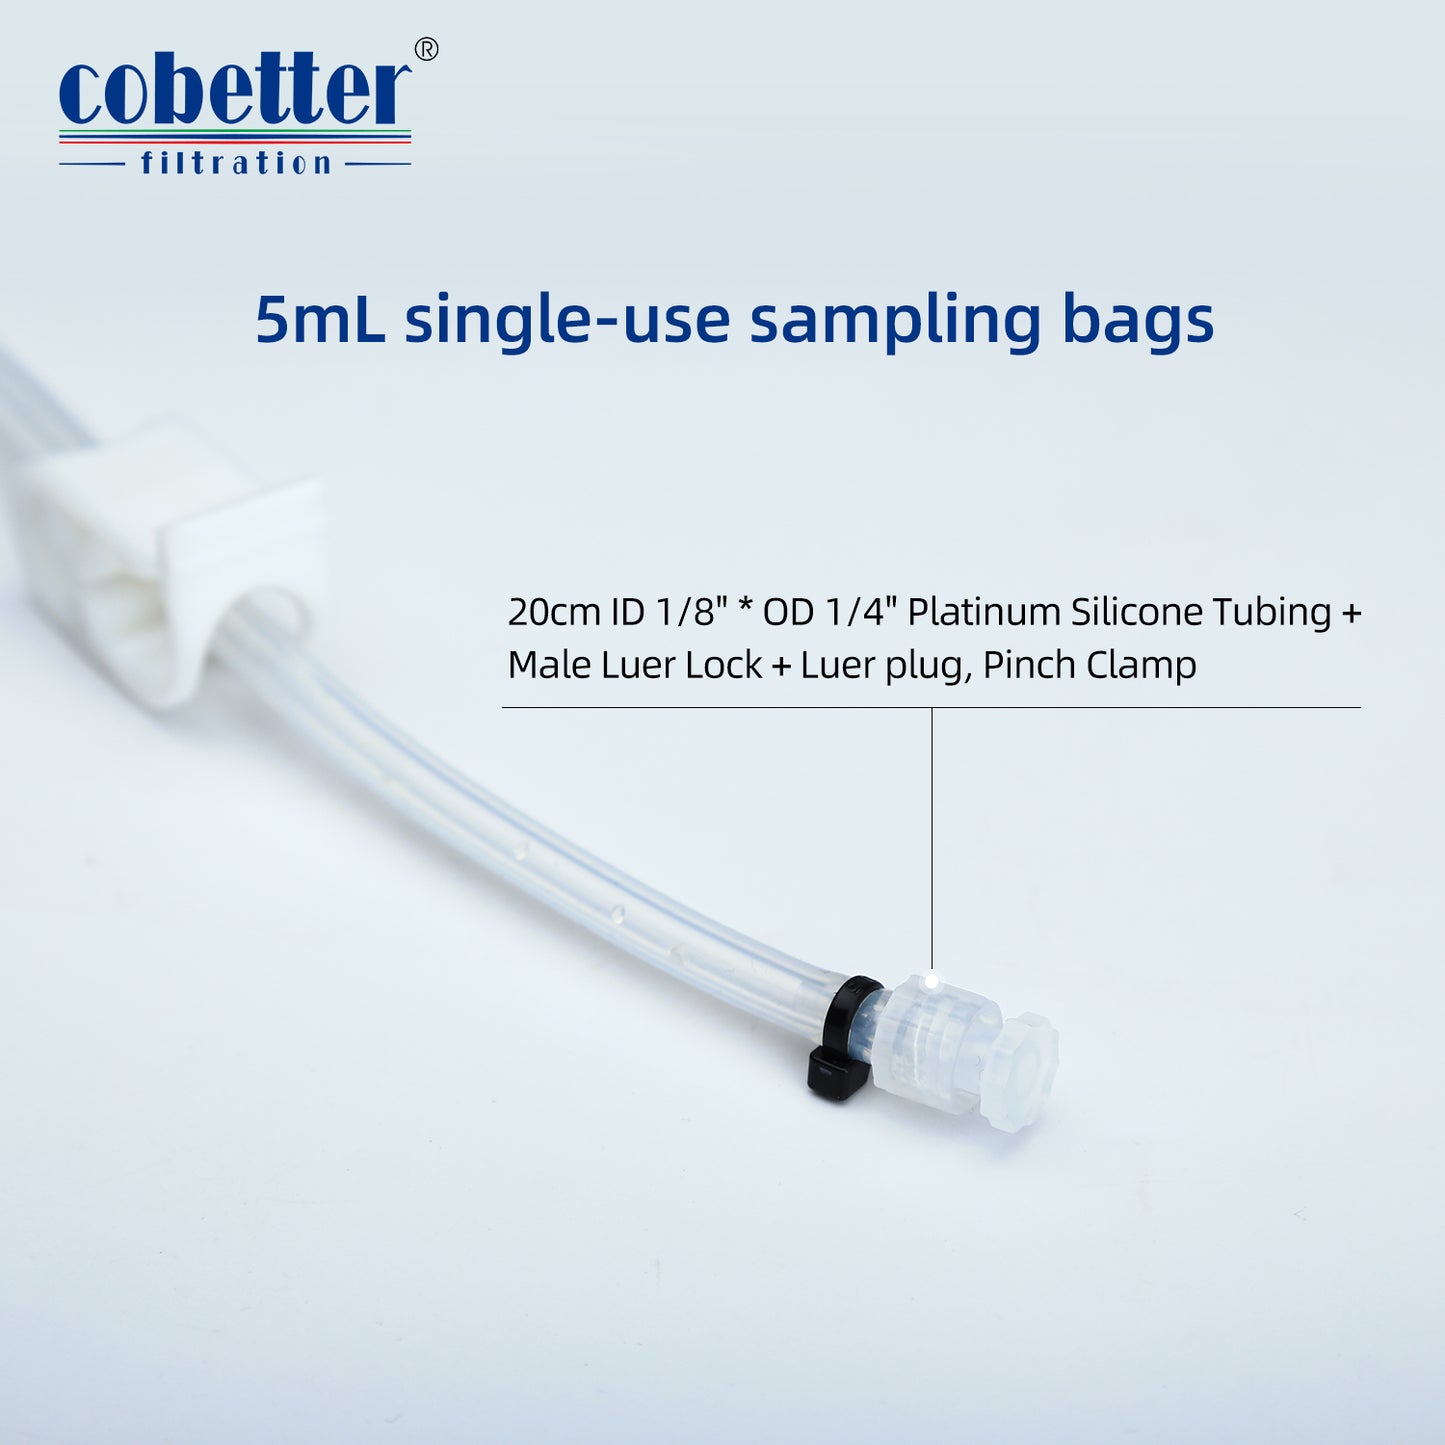 COBETTER 5mL Sampling Bag with 1/8''ID x 1/4''OD Tubing Sterile by Gamma Irradiation